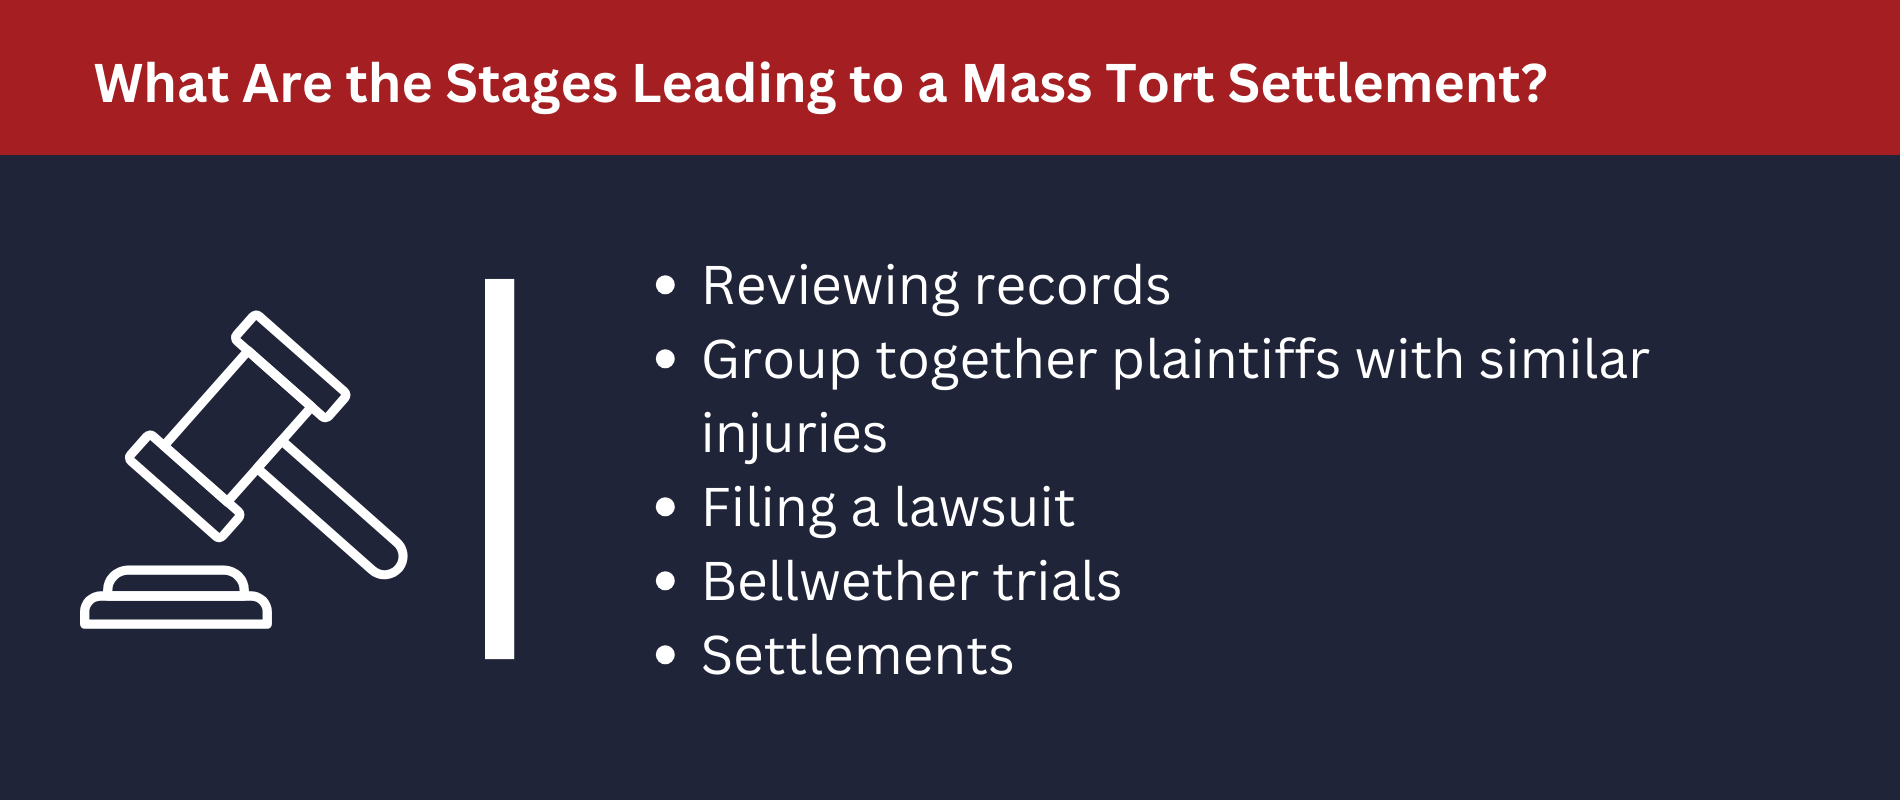 What Are the Stages Leading to a Mass Tort Settlement